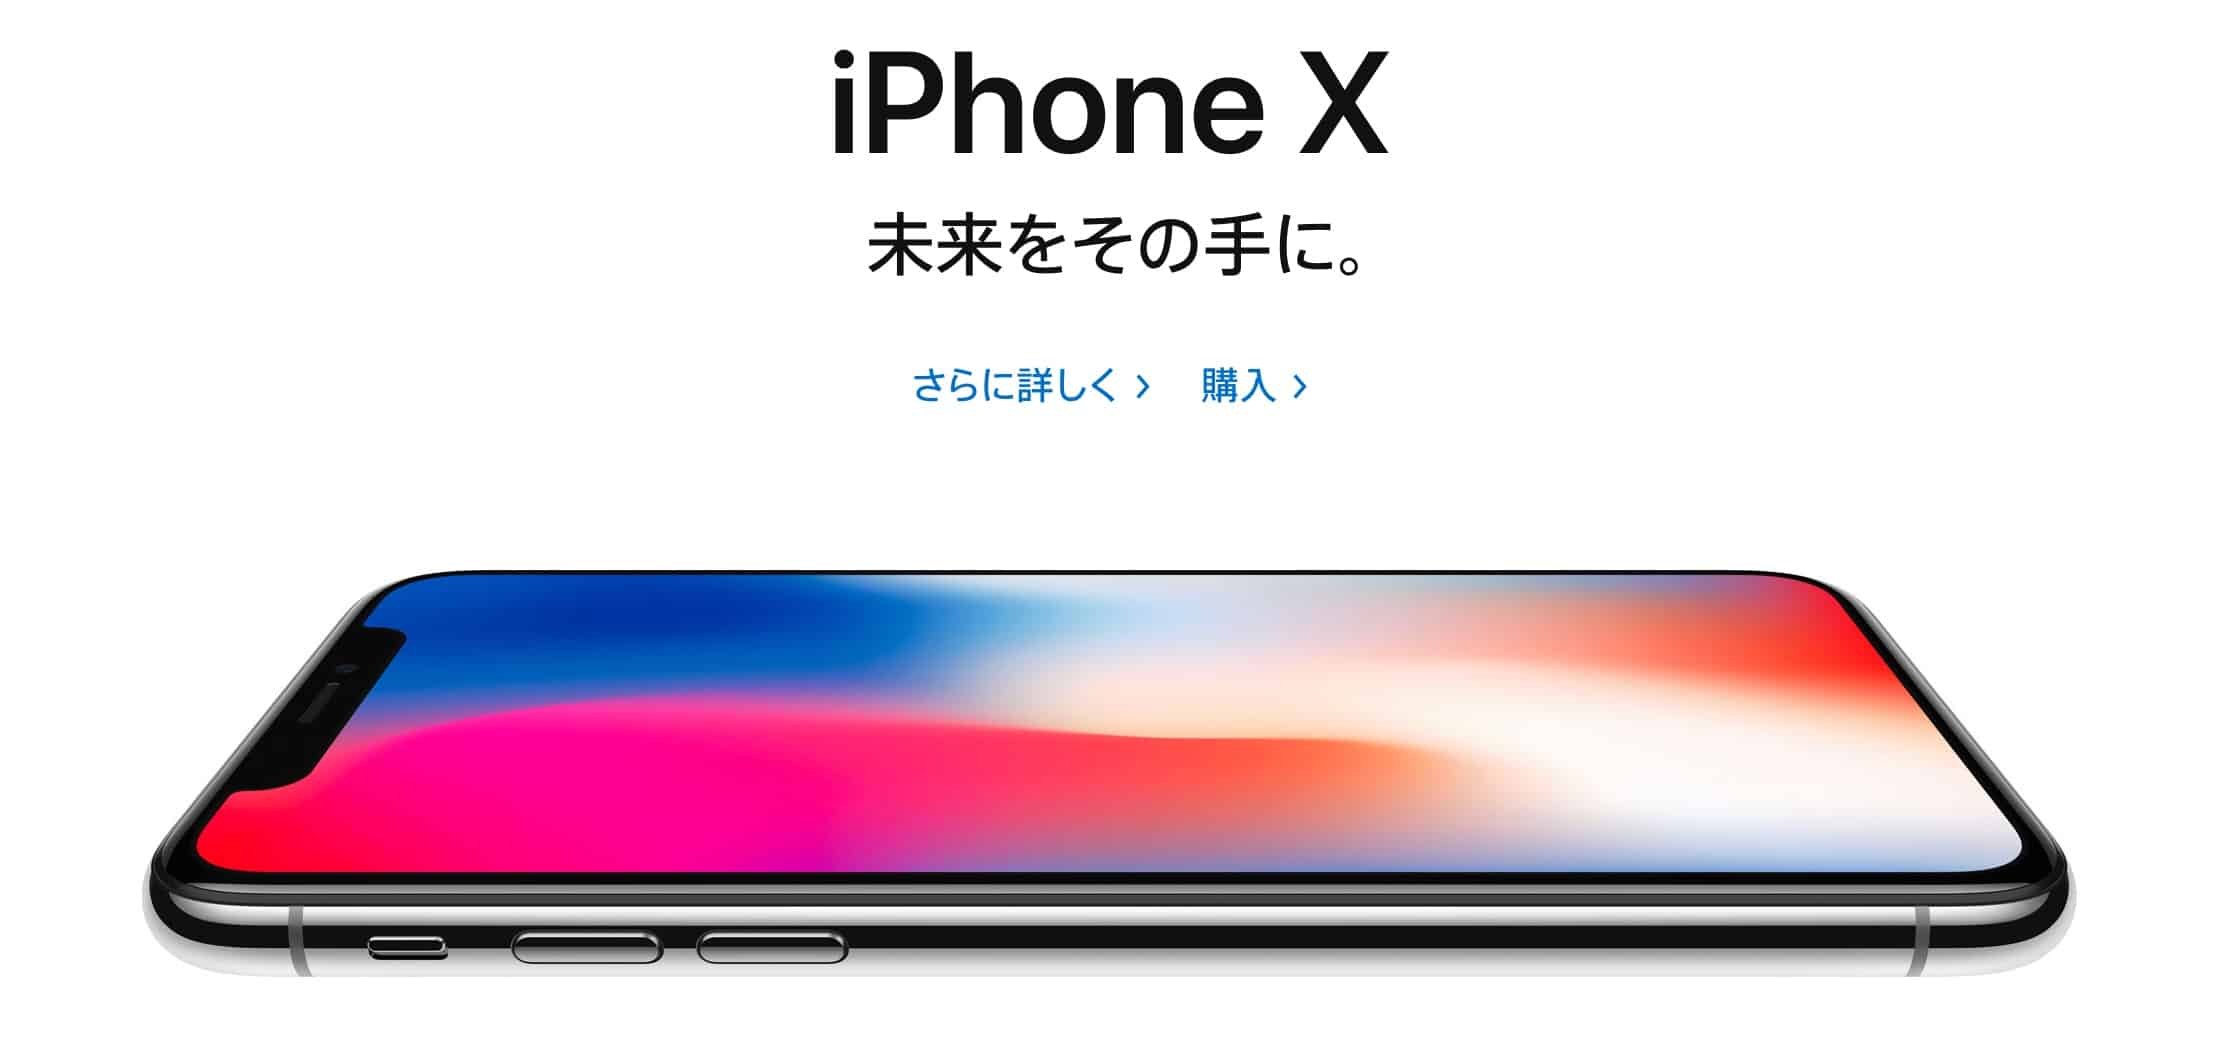 Apple Japan required carriers to subsidize iPhone